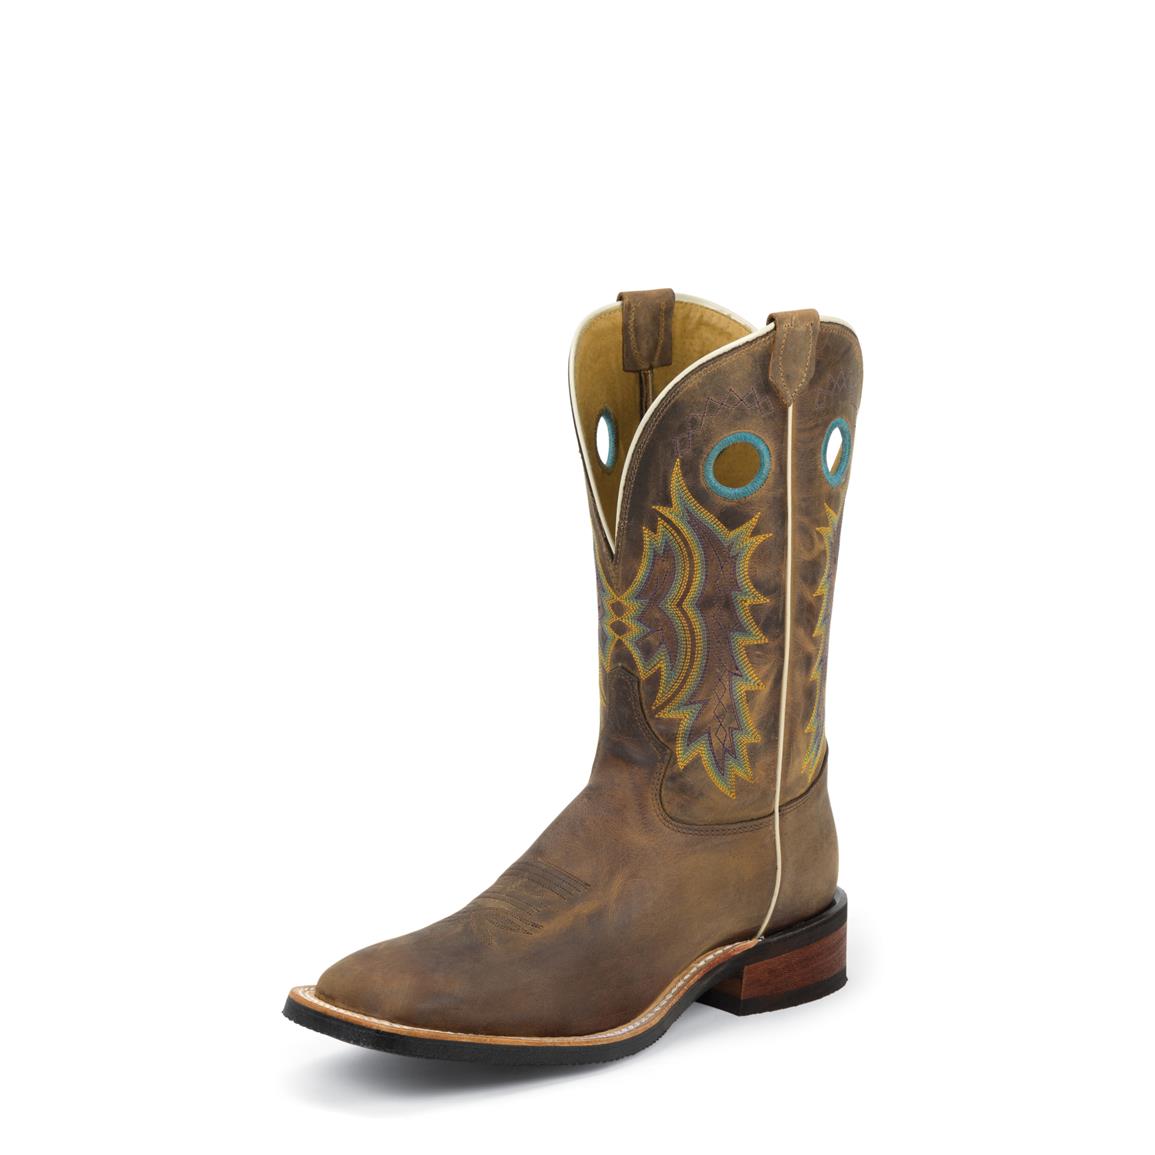 Picture of Tony Lama cowboy boots photo